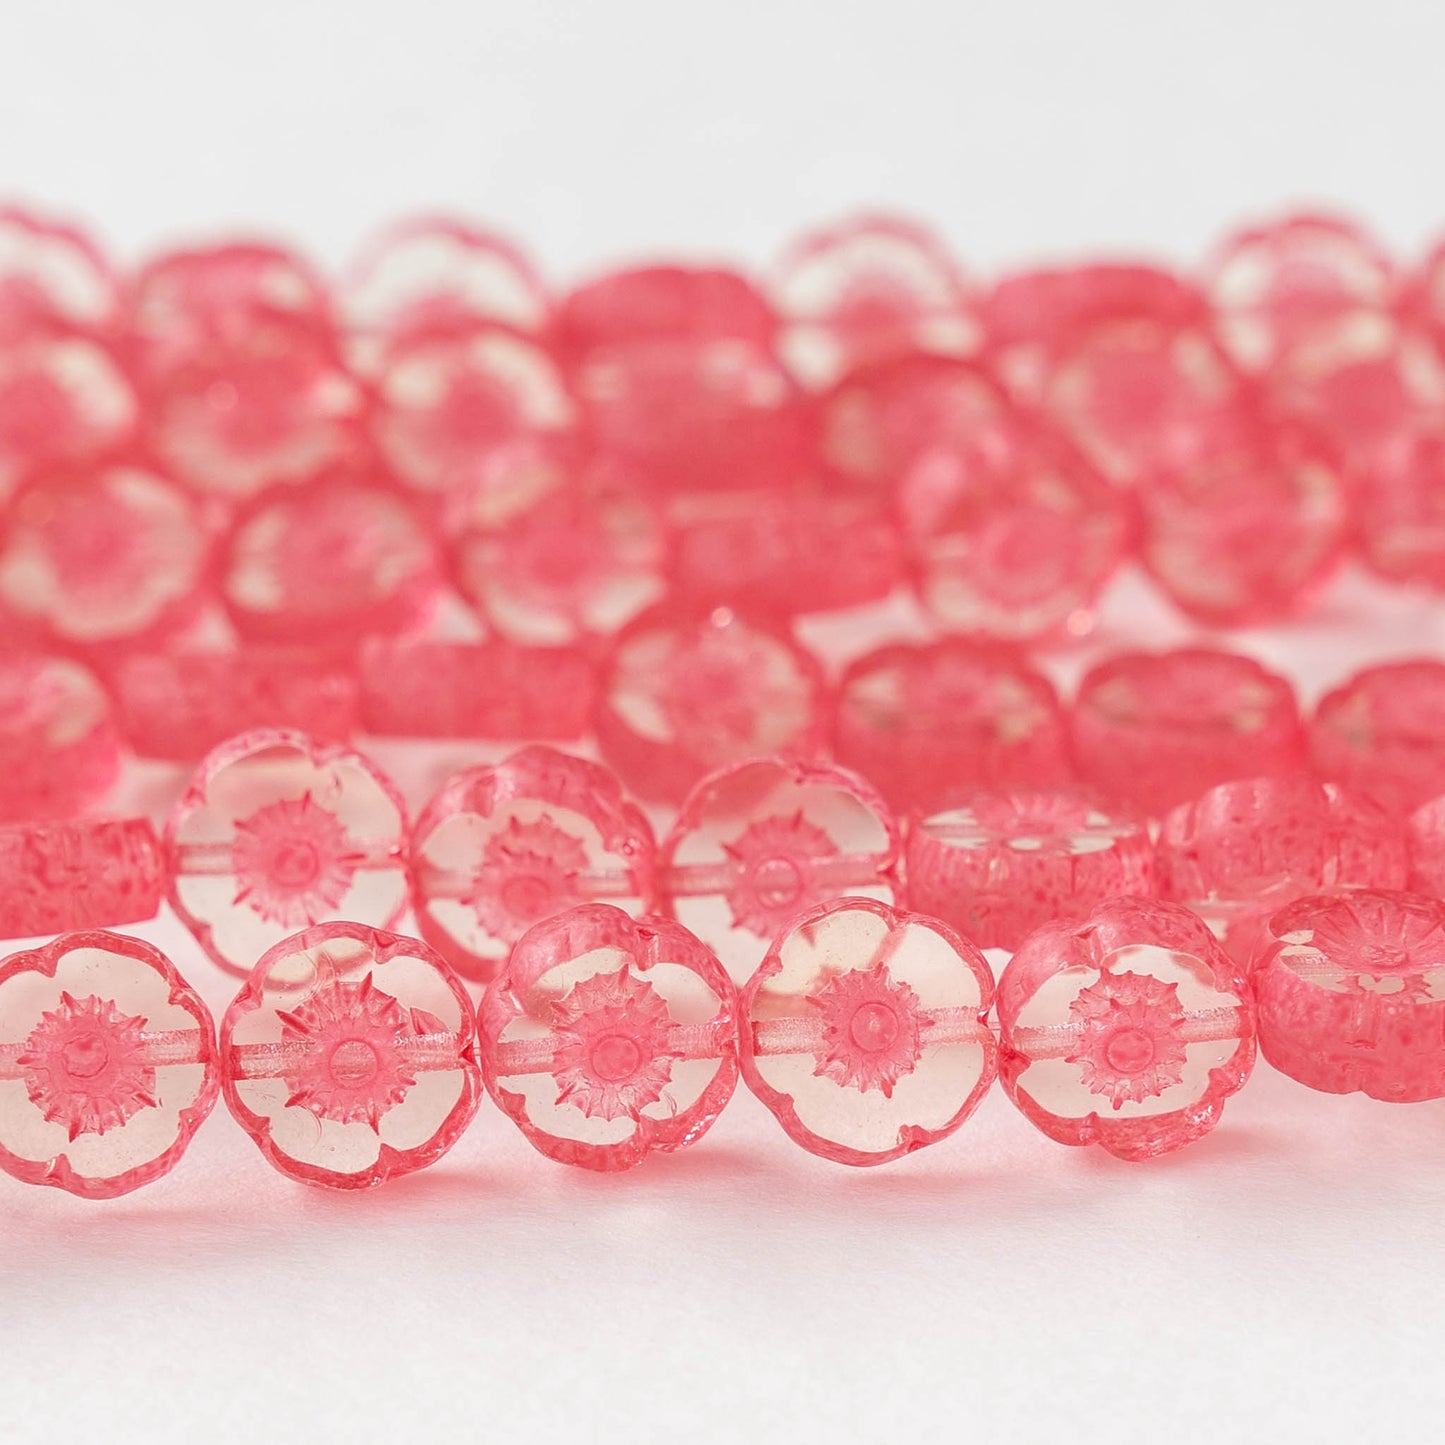 8mm Flower Beads - Crystal with Coral -20 Beads